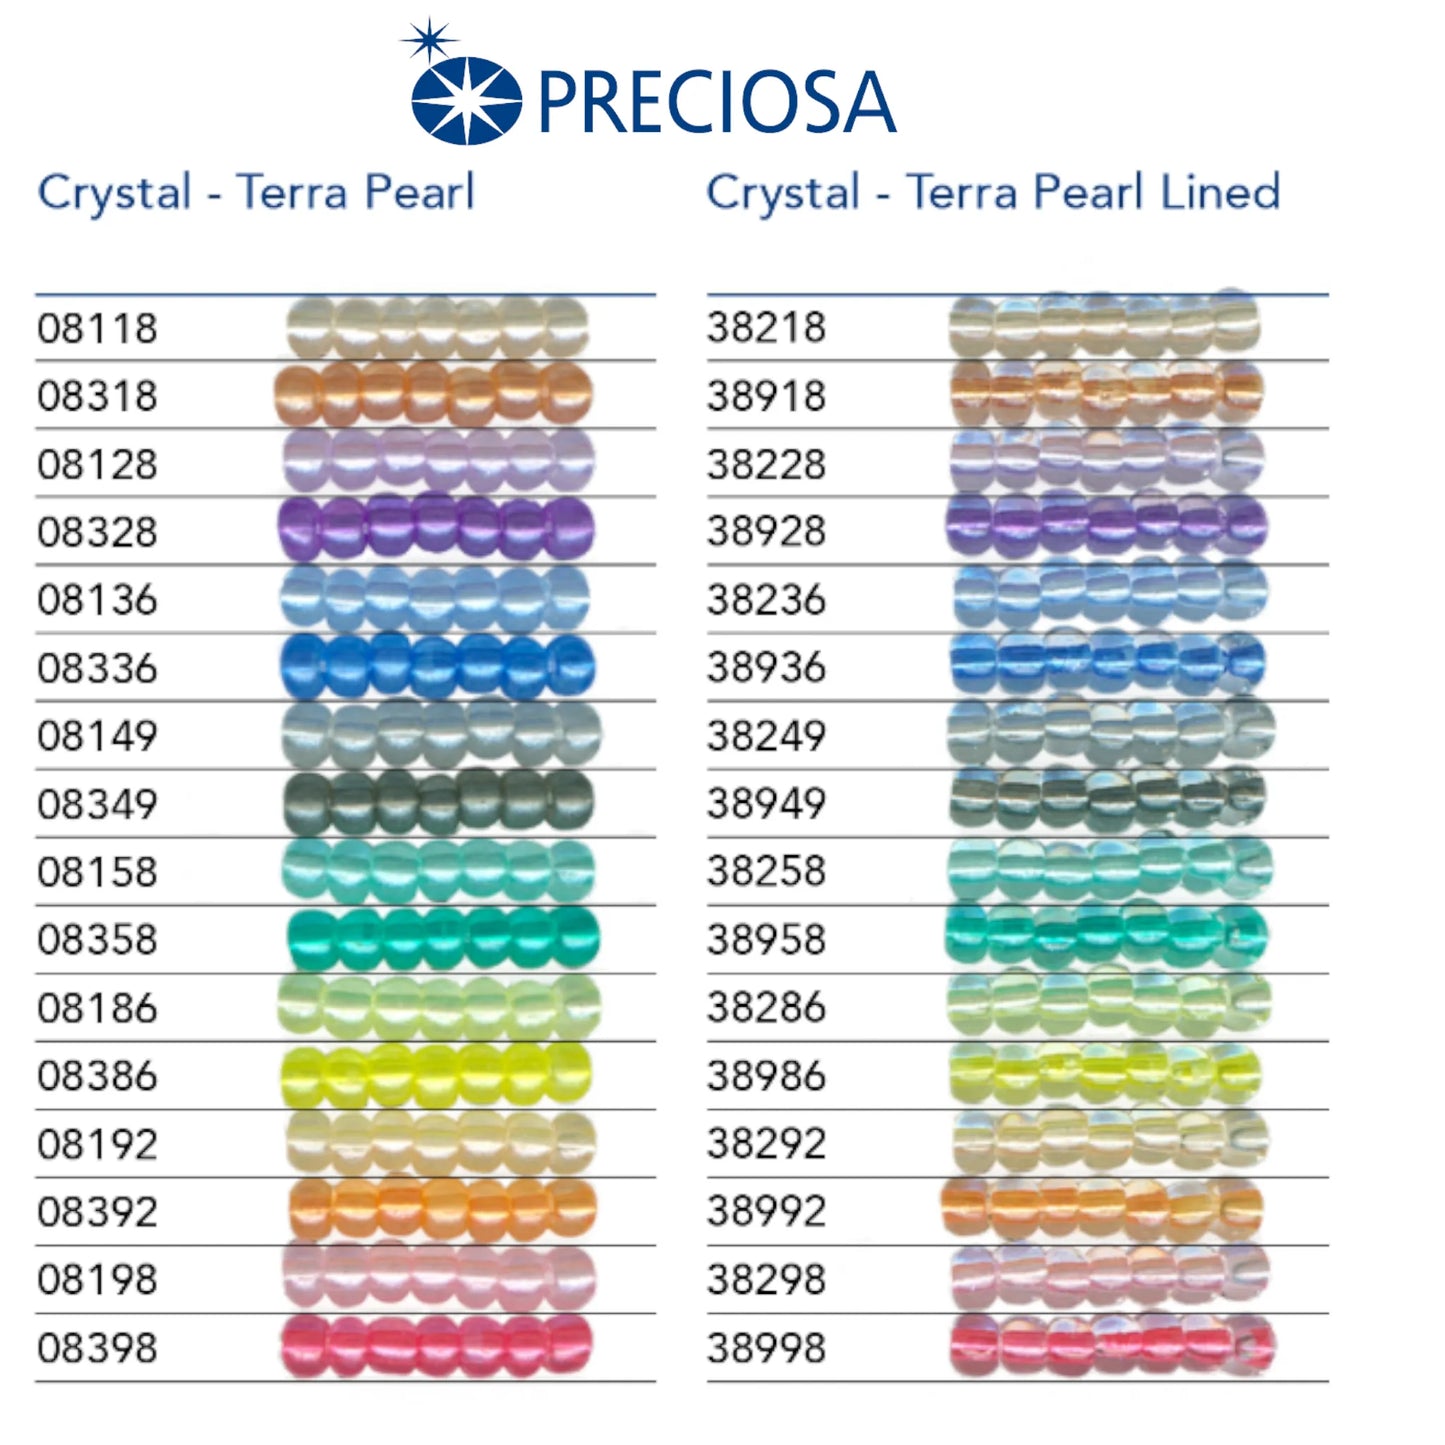 08158 Czech seed beads PRECIOSA Rocailles 10/0 turquoise. Crystal - Terra Pearl.